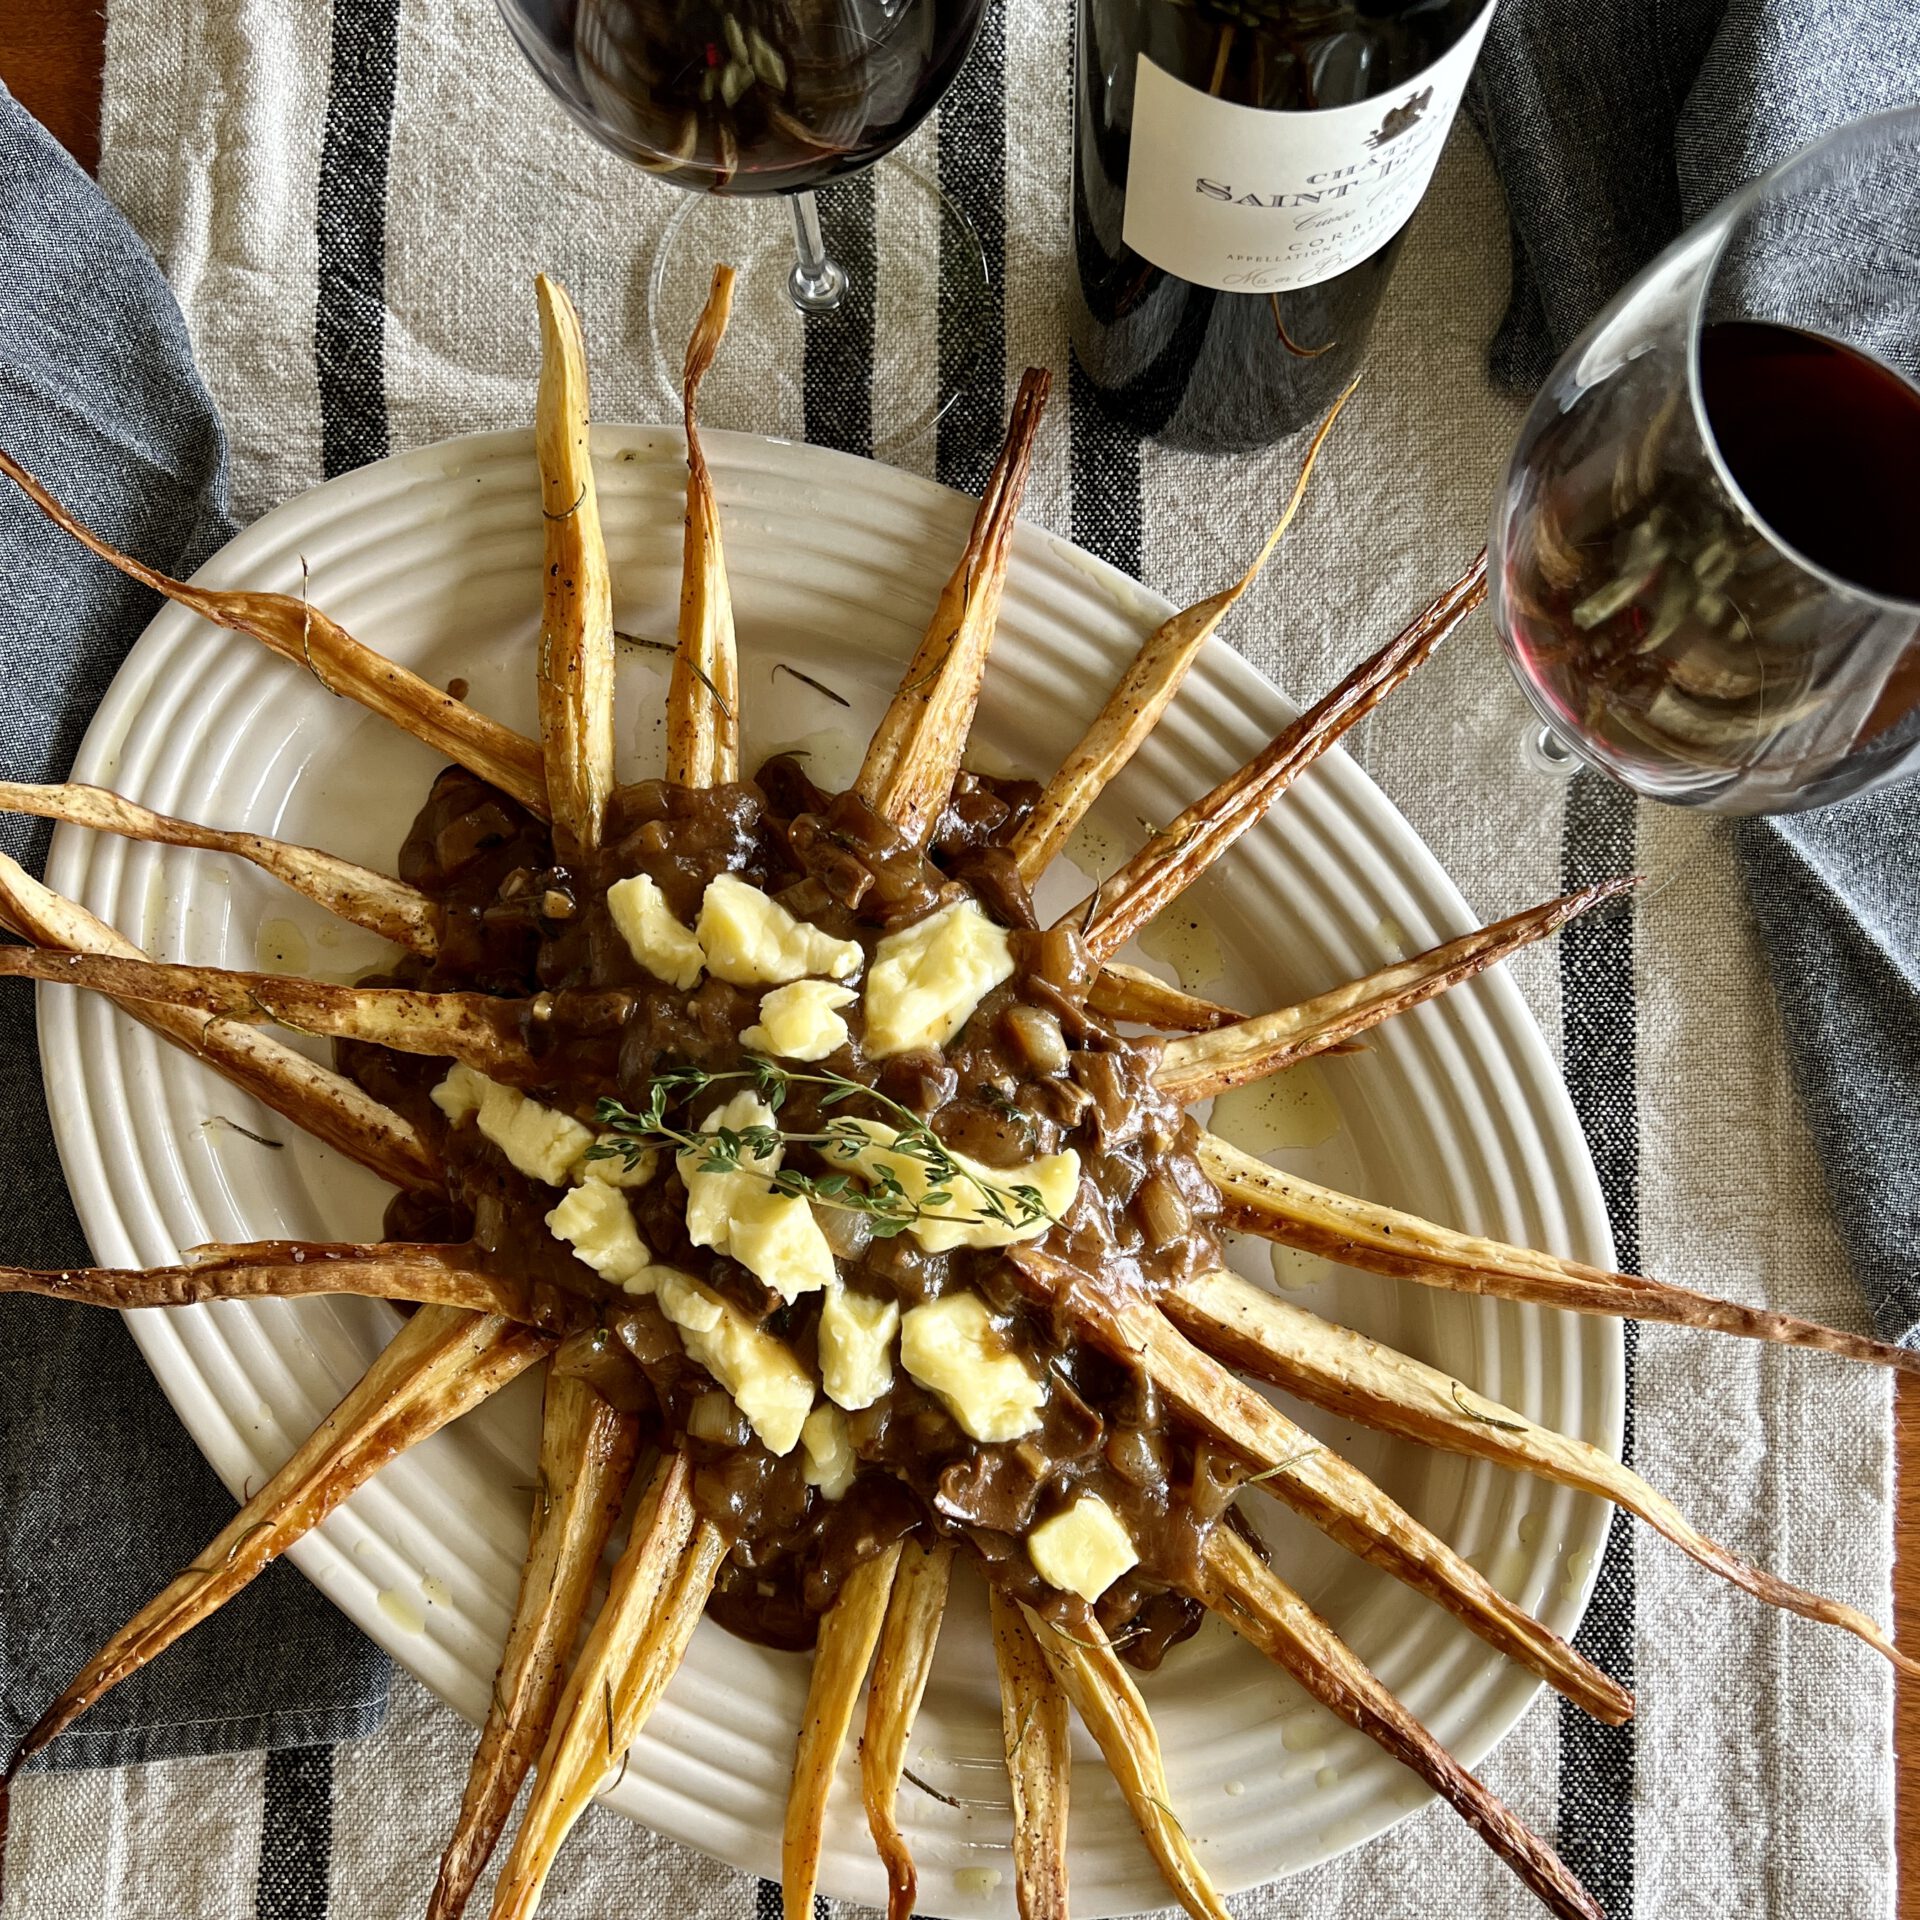 Parsnip Poutine with Rich Mushroom Gravy on a platter, surrounded by wine bottle and glasses.